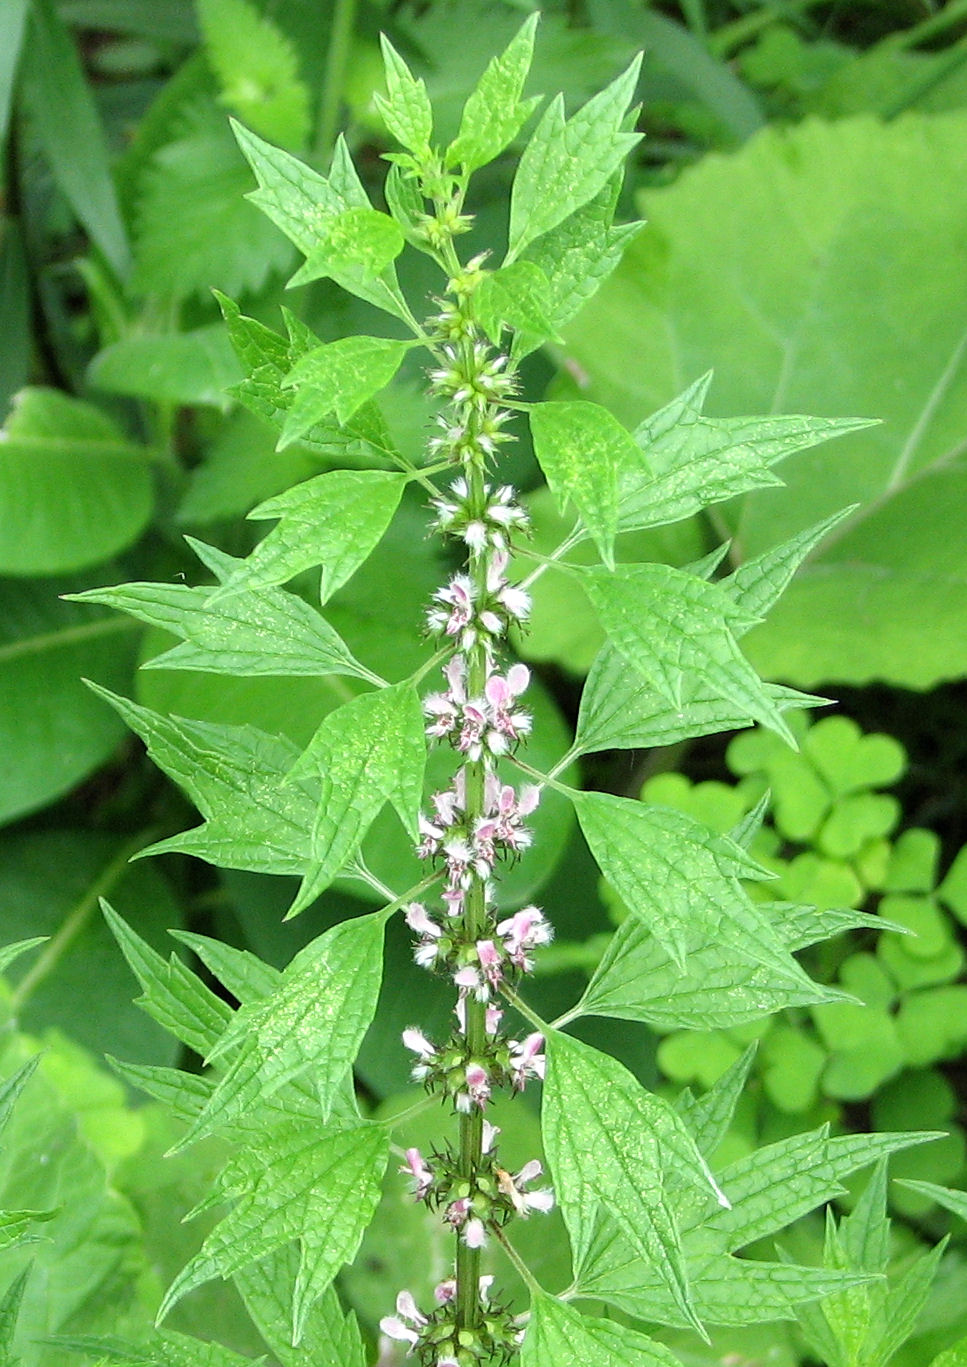 Motherwort tincture is an herbal medicine that is made by dissolving extracts from the motherwort plant in alcohol